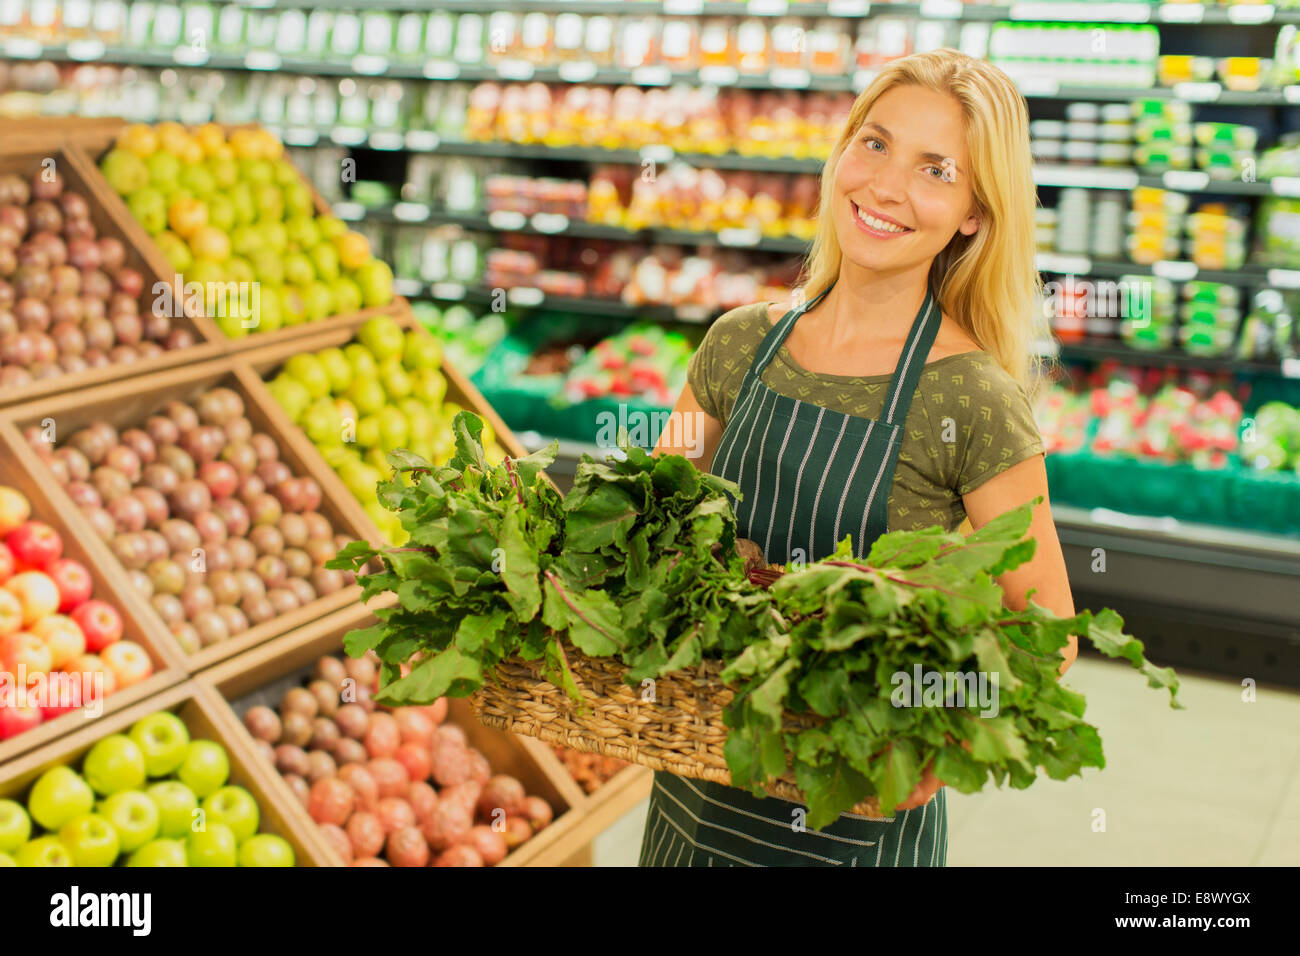 Grocery clerk working in produce aisle of supermarket store Stock Photo by  ©FreeProd 118794062